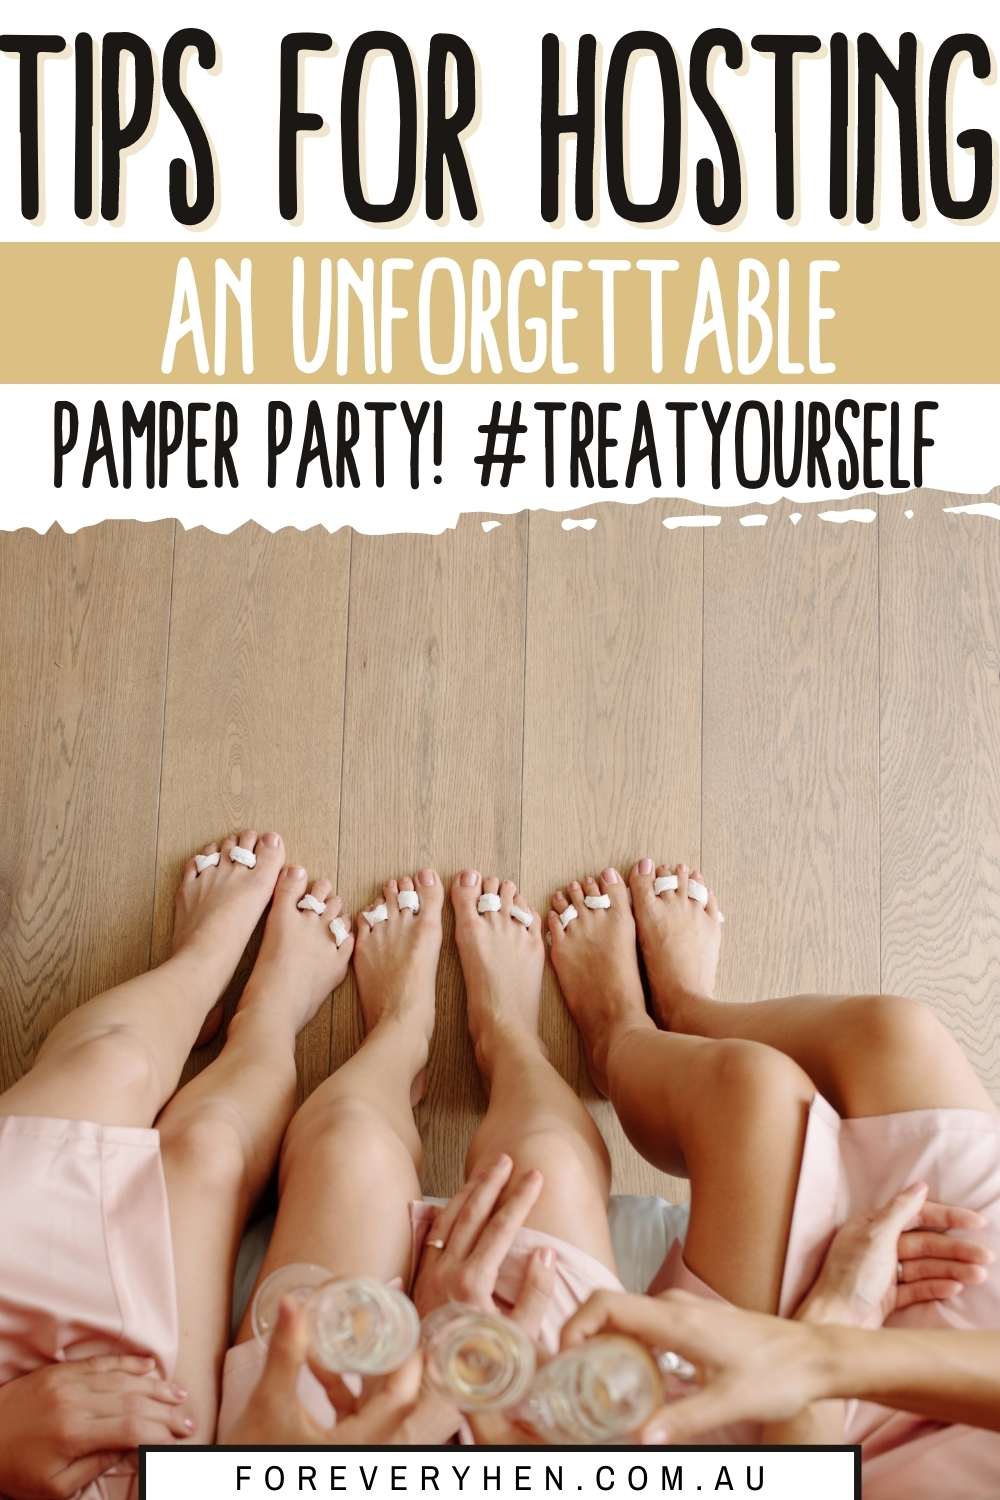 Hosting a Pamper Party